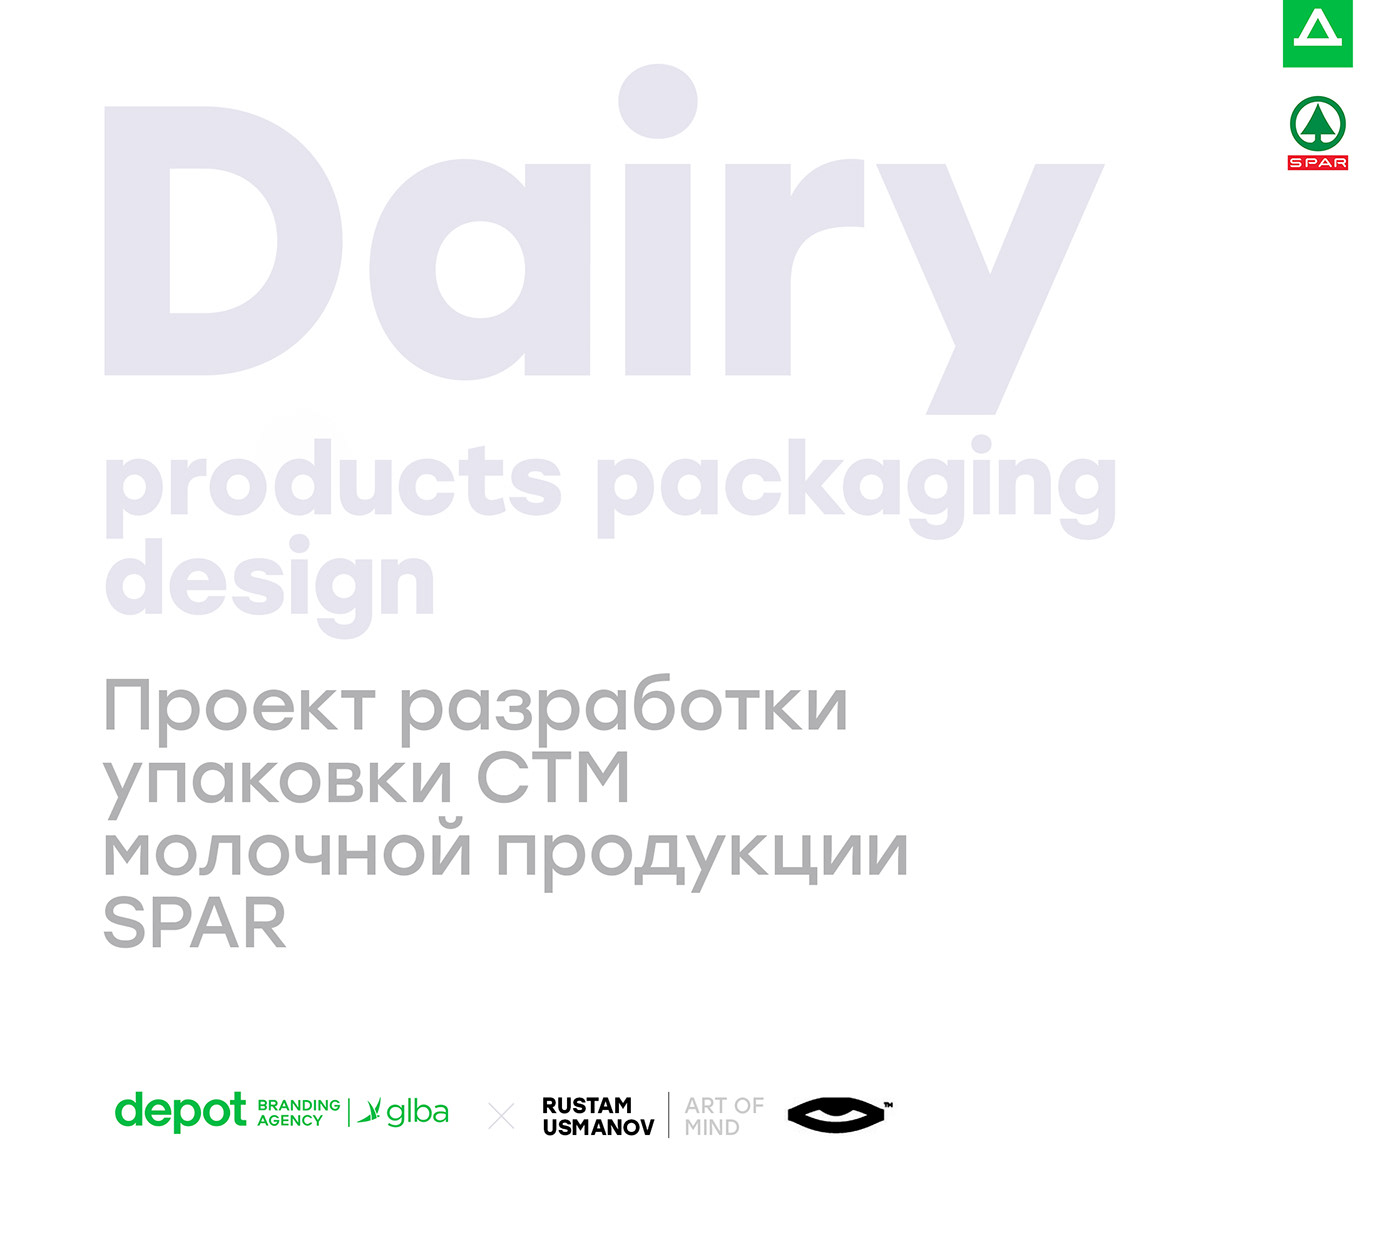 bottle chalk cow dairy products Food  ILLUSTRATION  milk Packaging pure design White